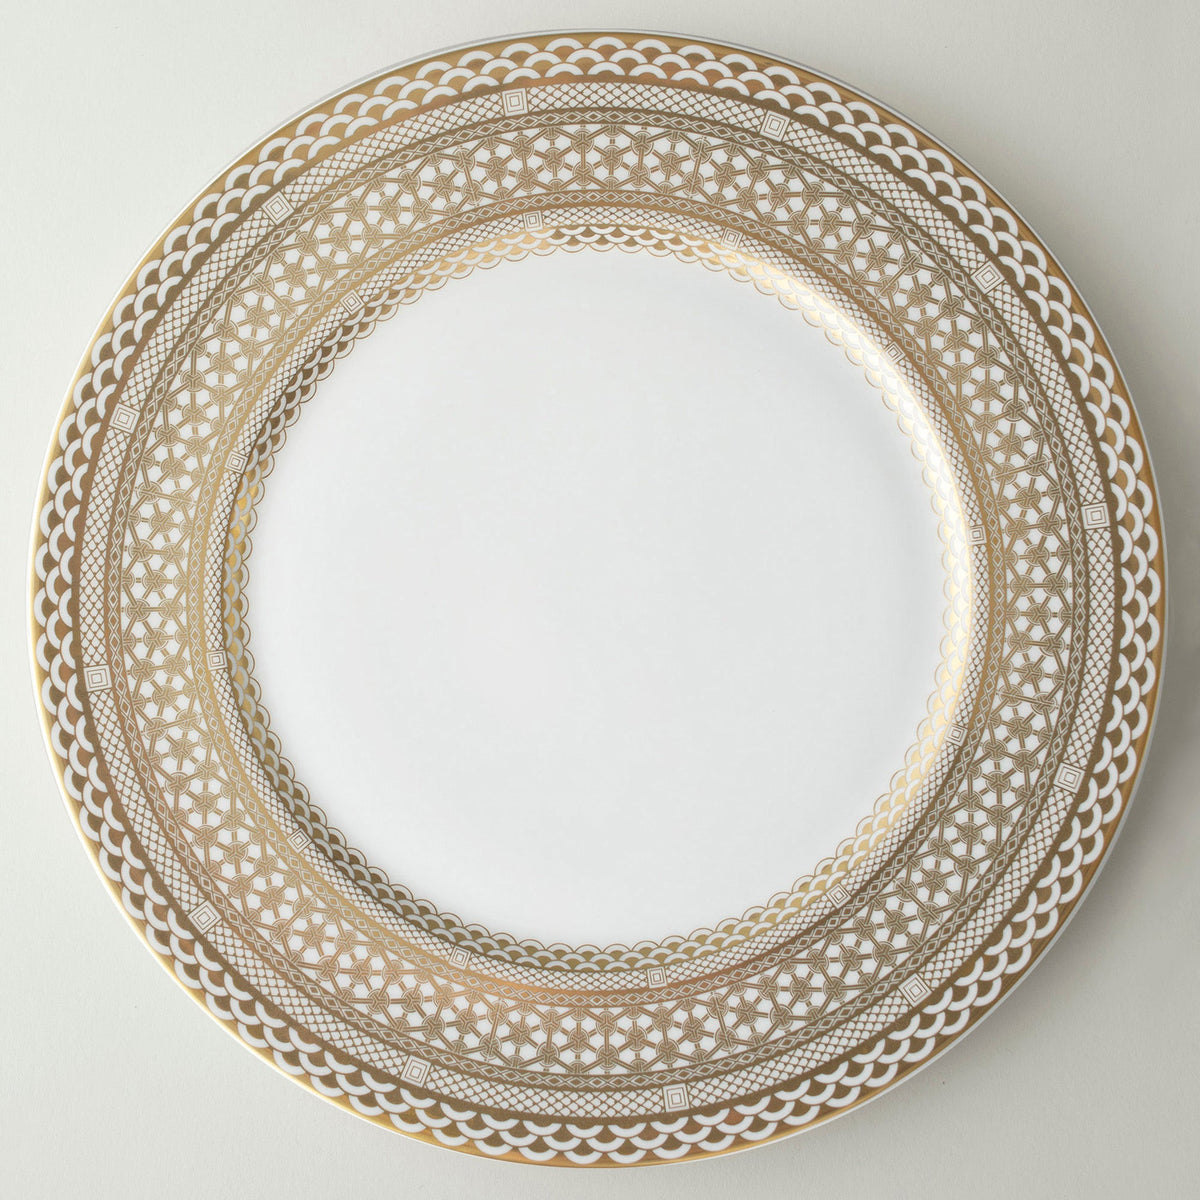 A Caskata Artisanal Home Hawthorne Gilt charger plate, crafted from bone china, featuring a beautiful pattern in gold and white.